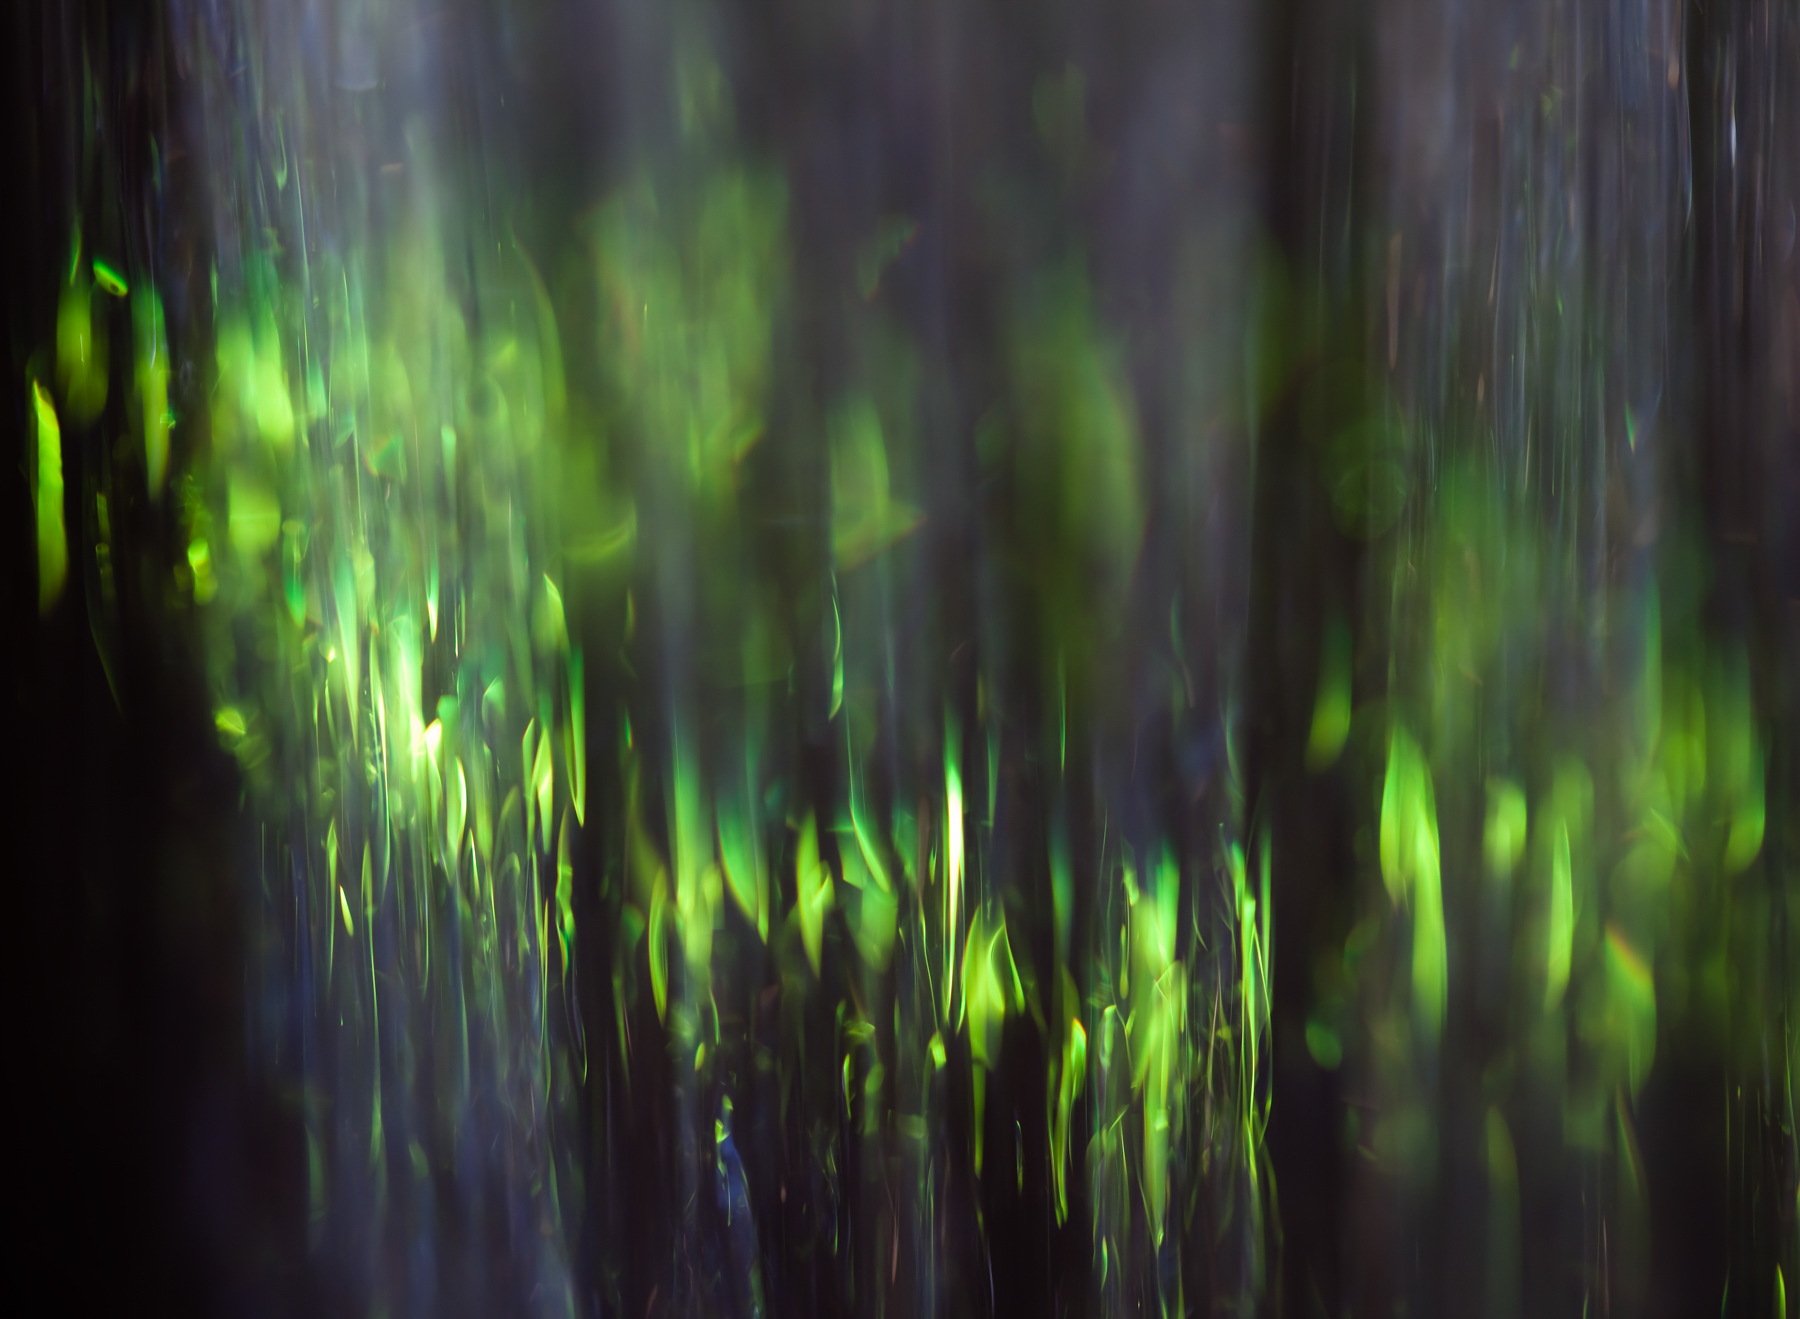 Fine Art Photo of falling water refracting green stained glass.